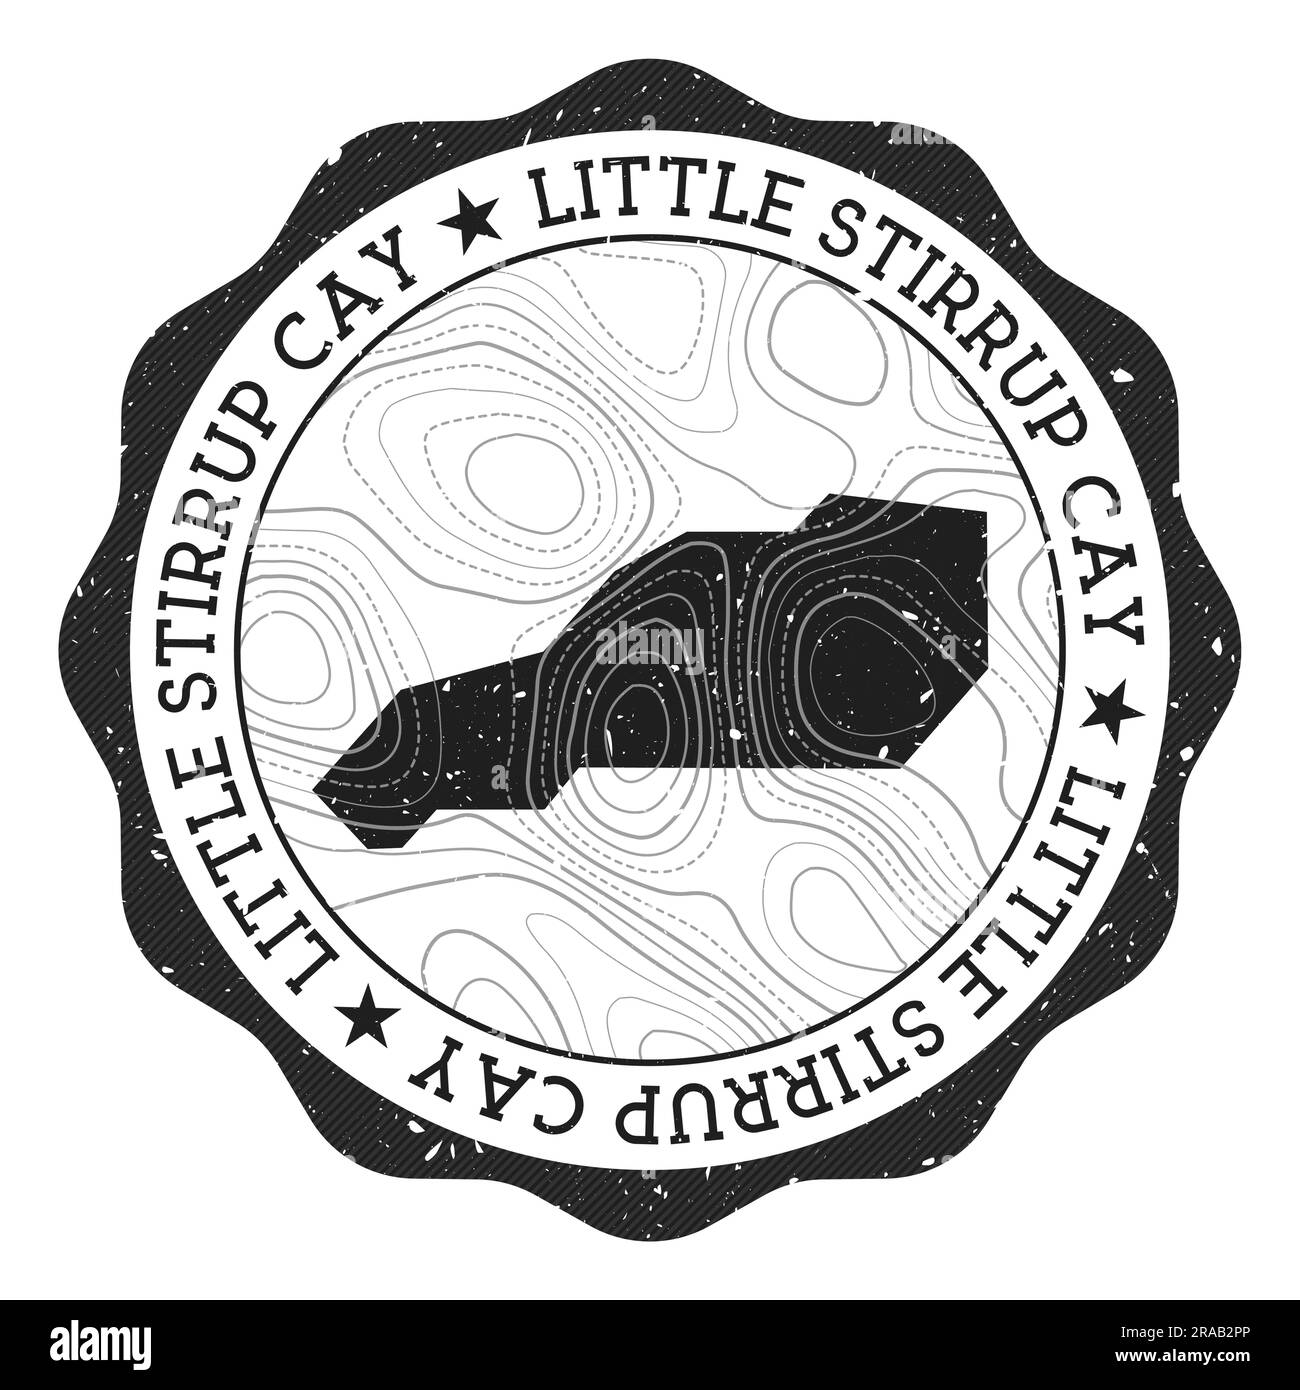 Little Stirrup Cay outdoor stamp. Round sticker with map of island with topographic isolines. Vector illustration. Can be used as insignia, logotype, Stock Vector